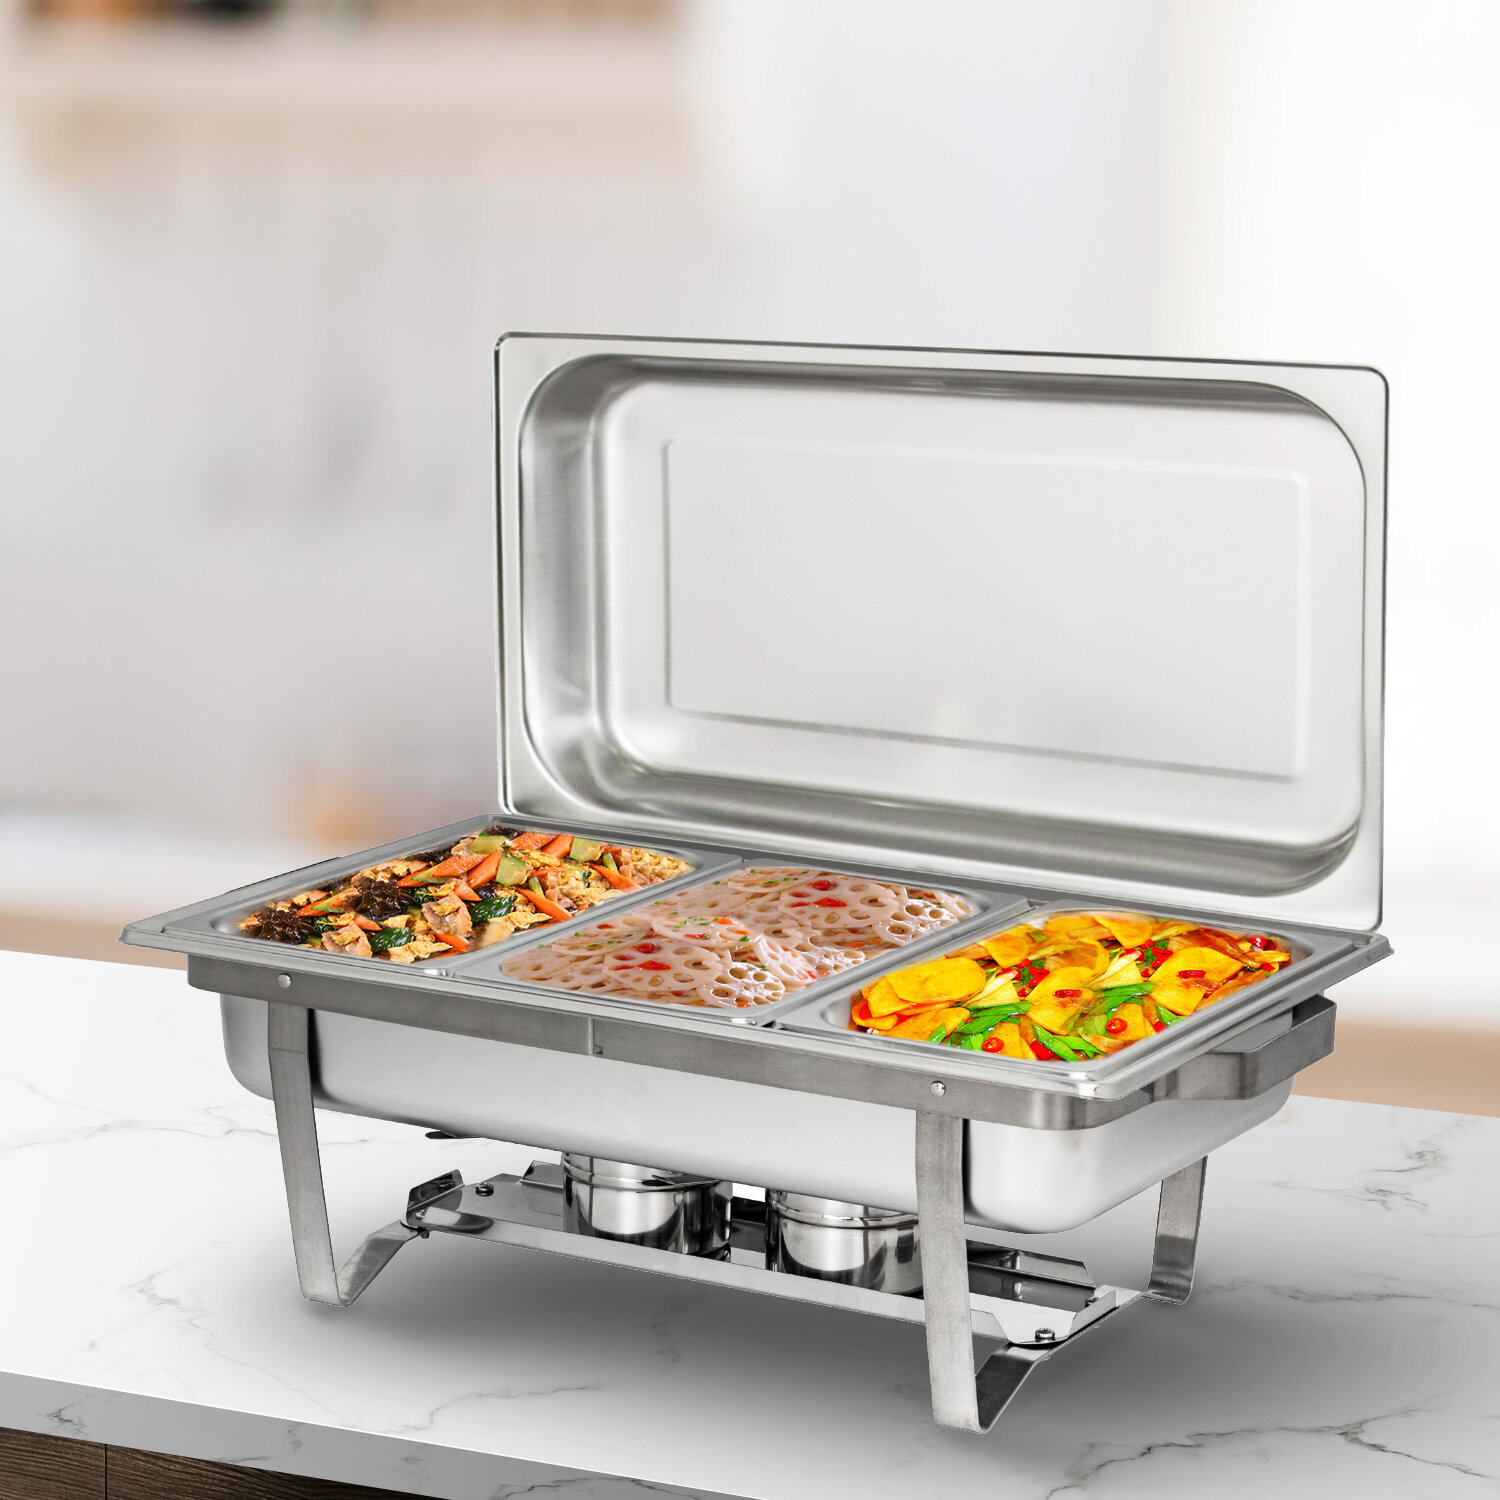 [BIG SALE] Chafing Dishes for Every Occasion You’ll Love In 2020 | Wayfair